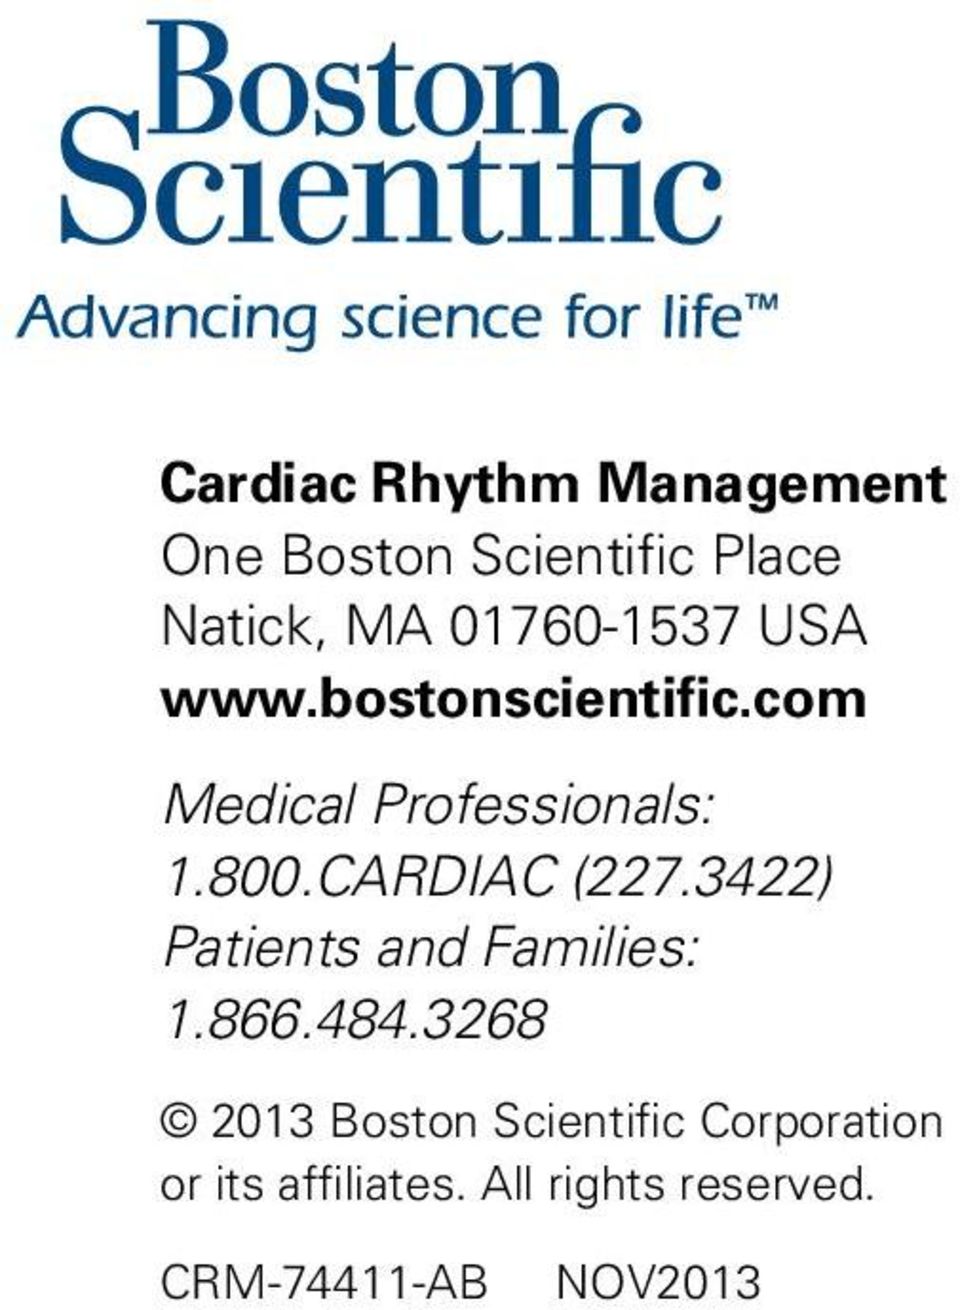 CARDIAC (227.3422) Patients and Families: 1.866.484.